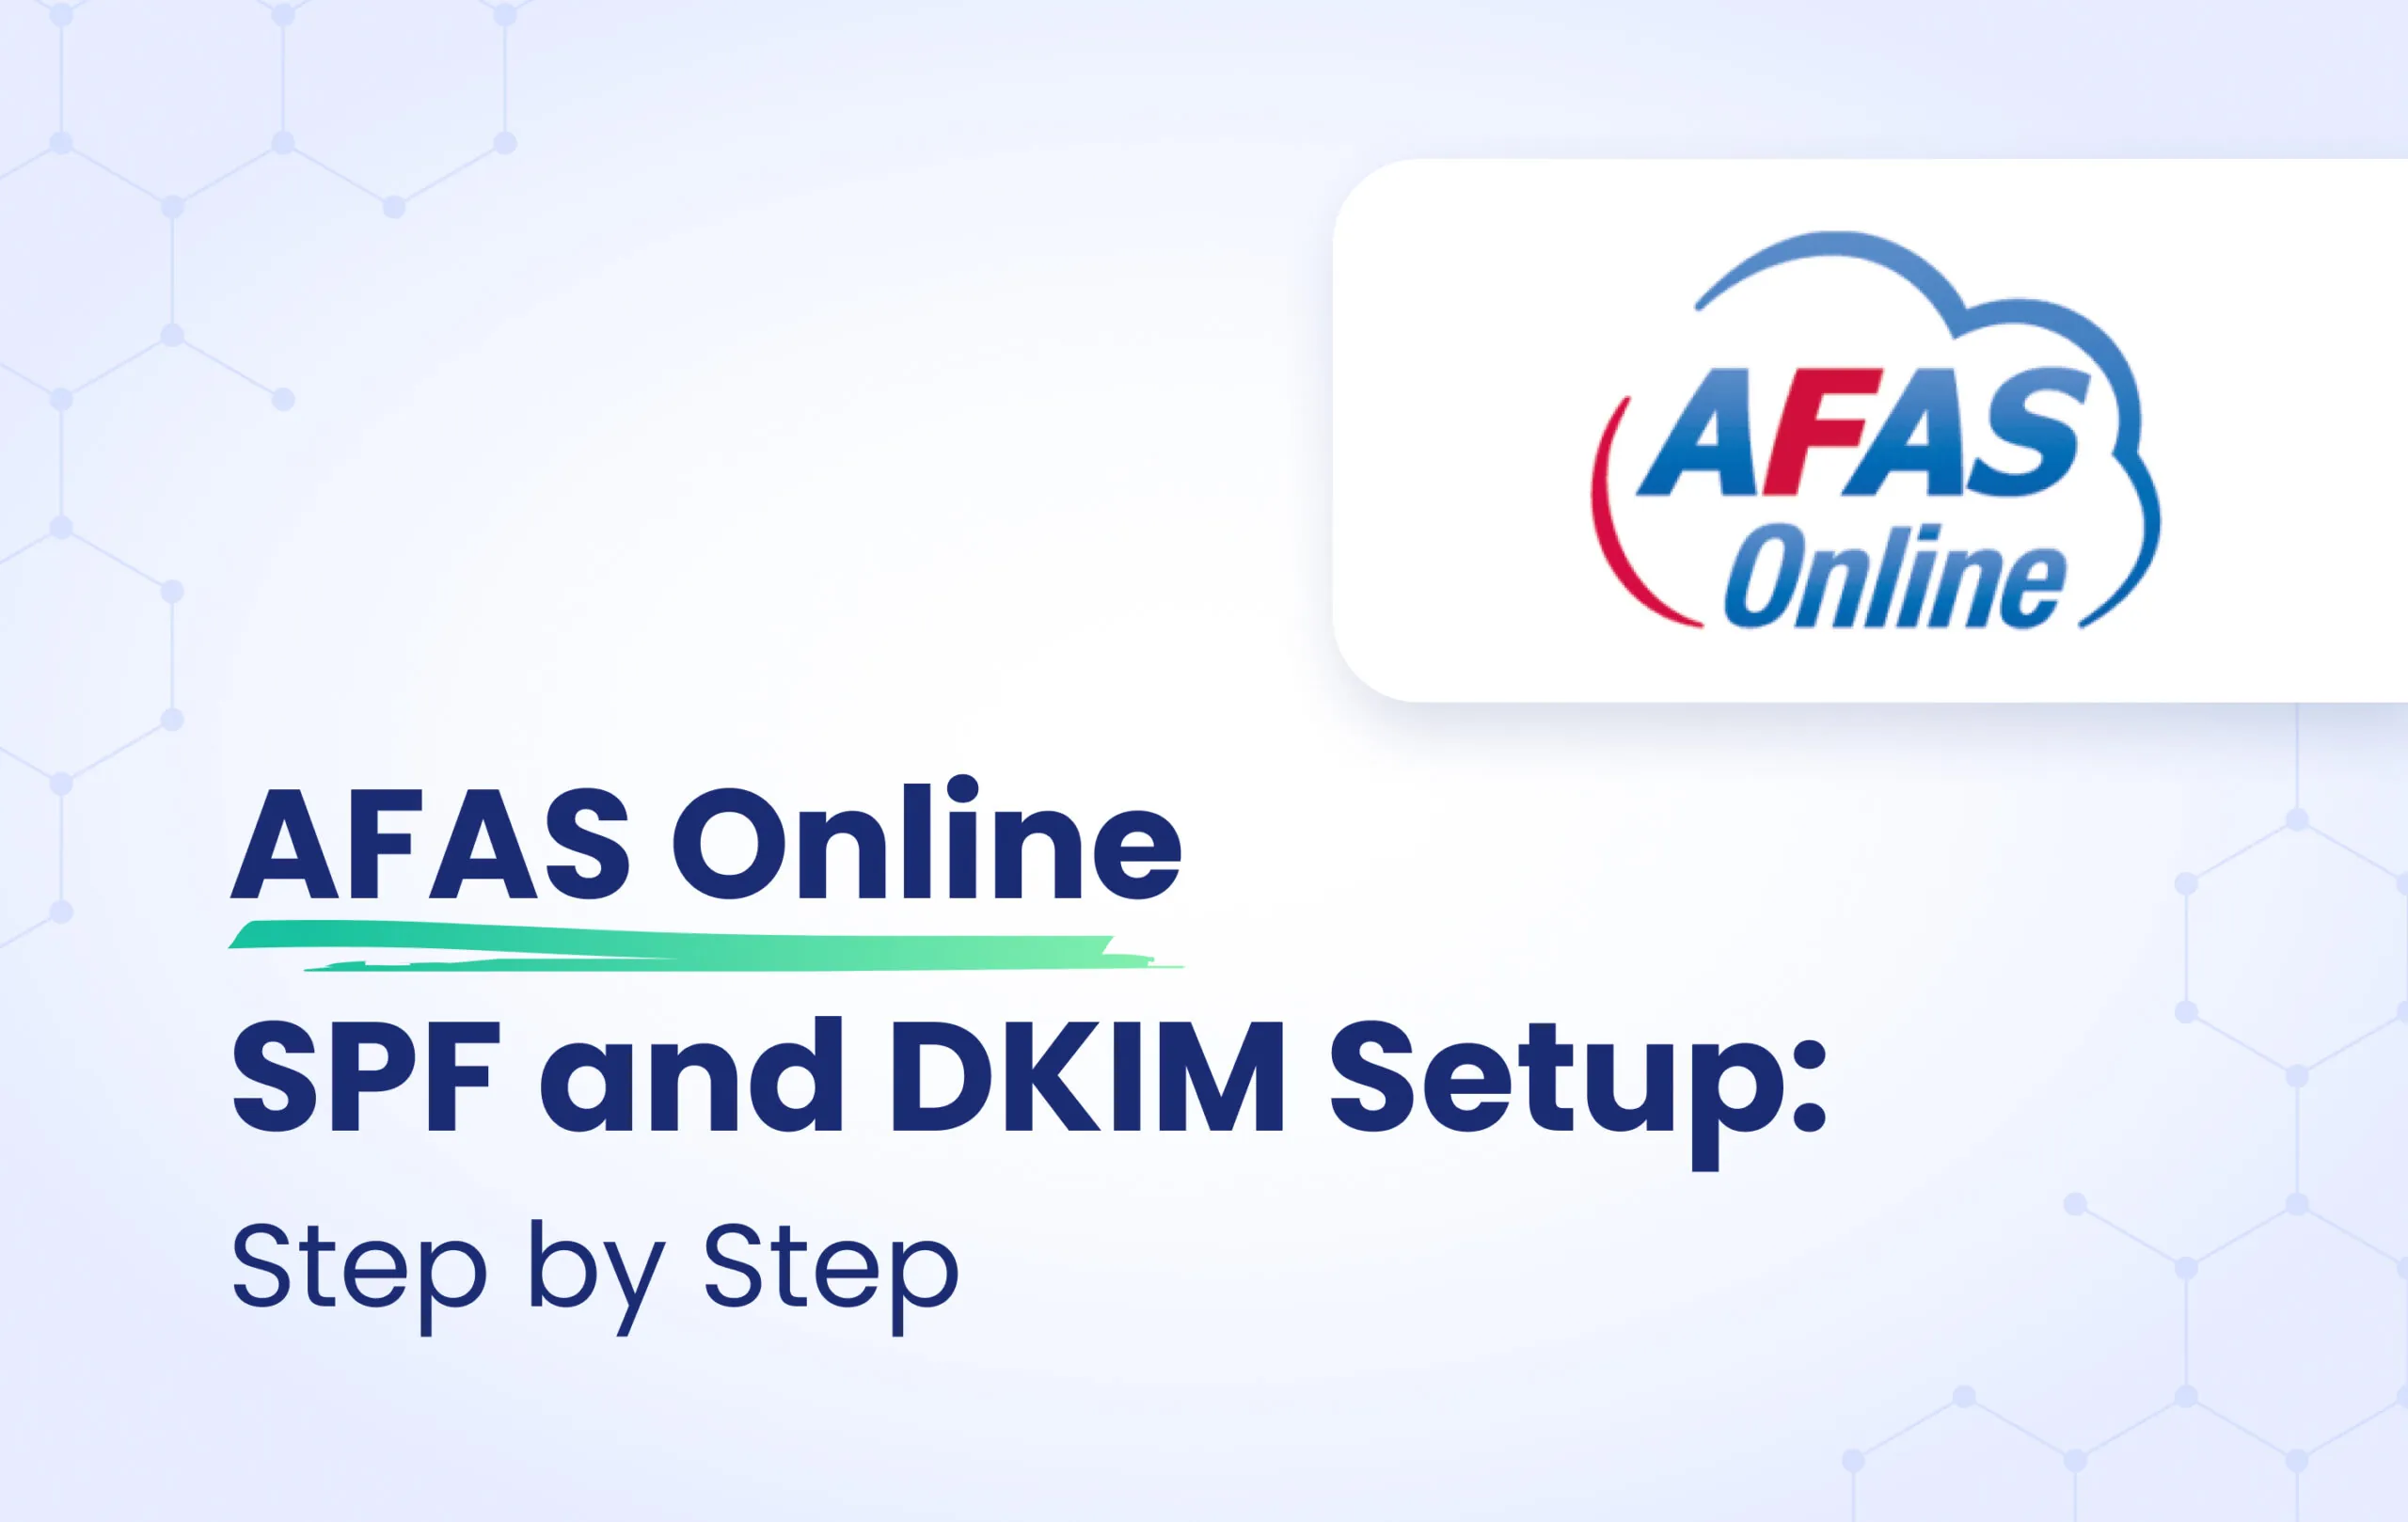 AFAS Online SPF and DKIM configuration